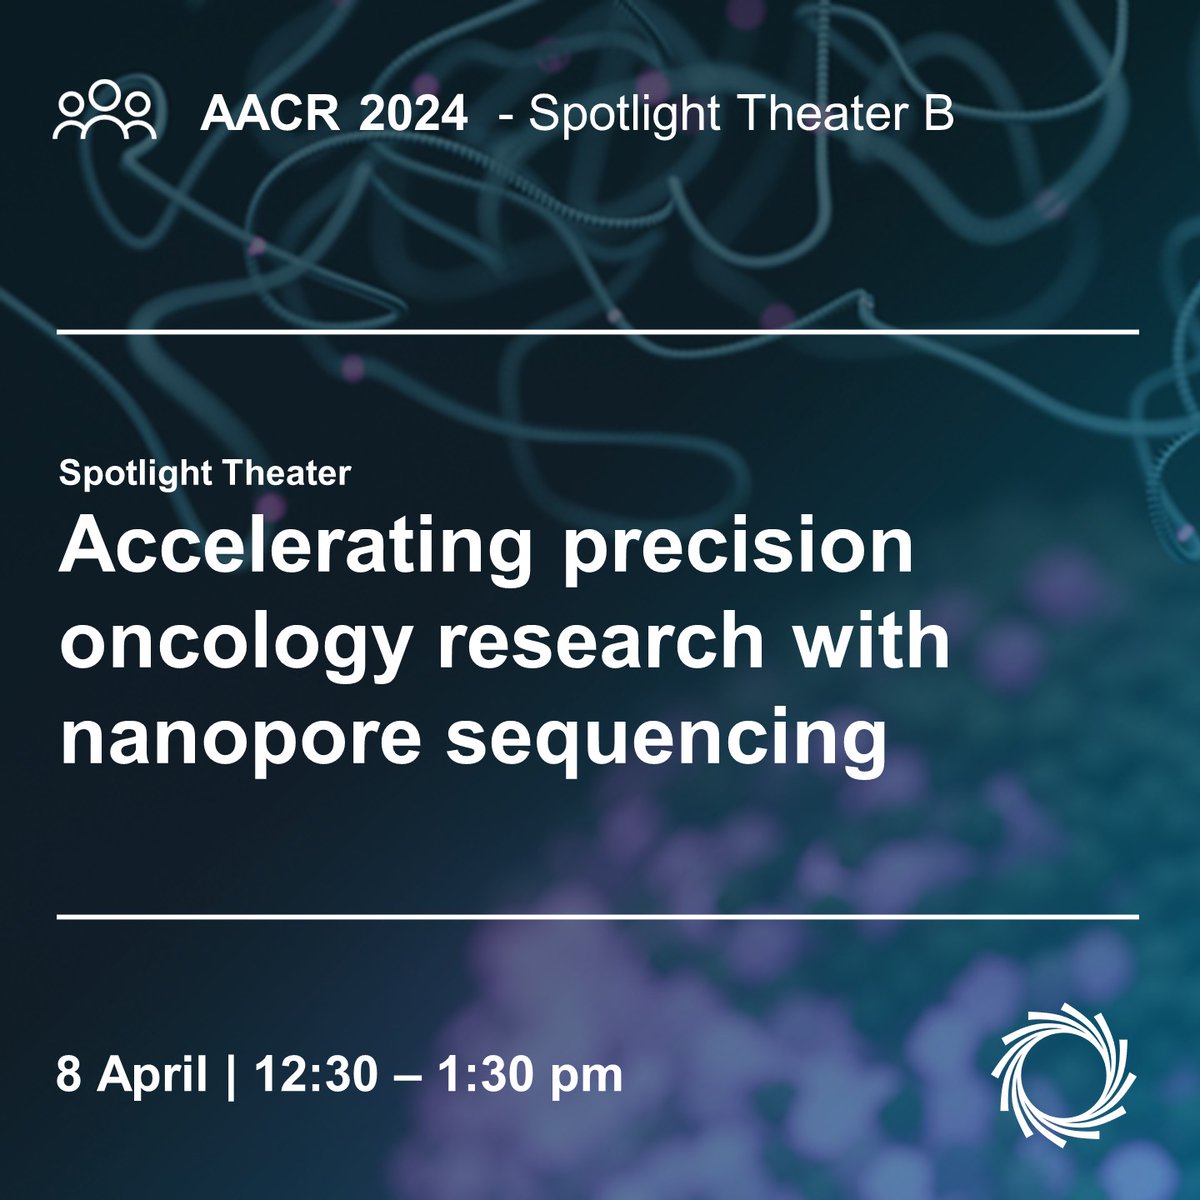 Our Exhibitor Spotlight Theater session at #AACR24 kicks off 12:30 PM. Hear how scientists are accelerating their precision oncology research with nanopore sequencing featuring projects ranging from cancer WGS to cell-free DNA profiling to single-cell sequencing.